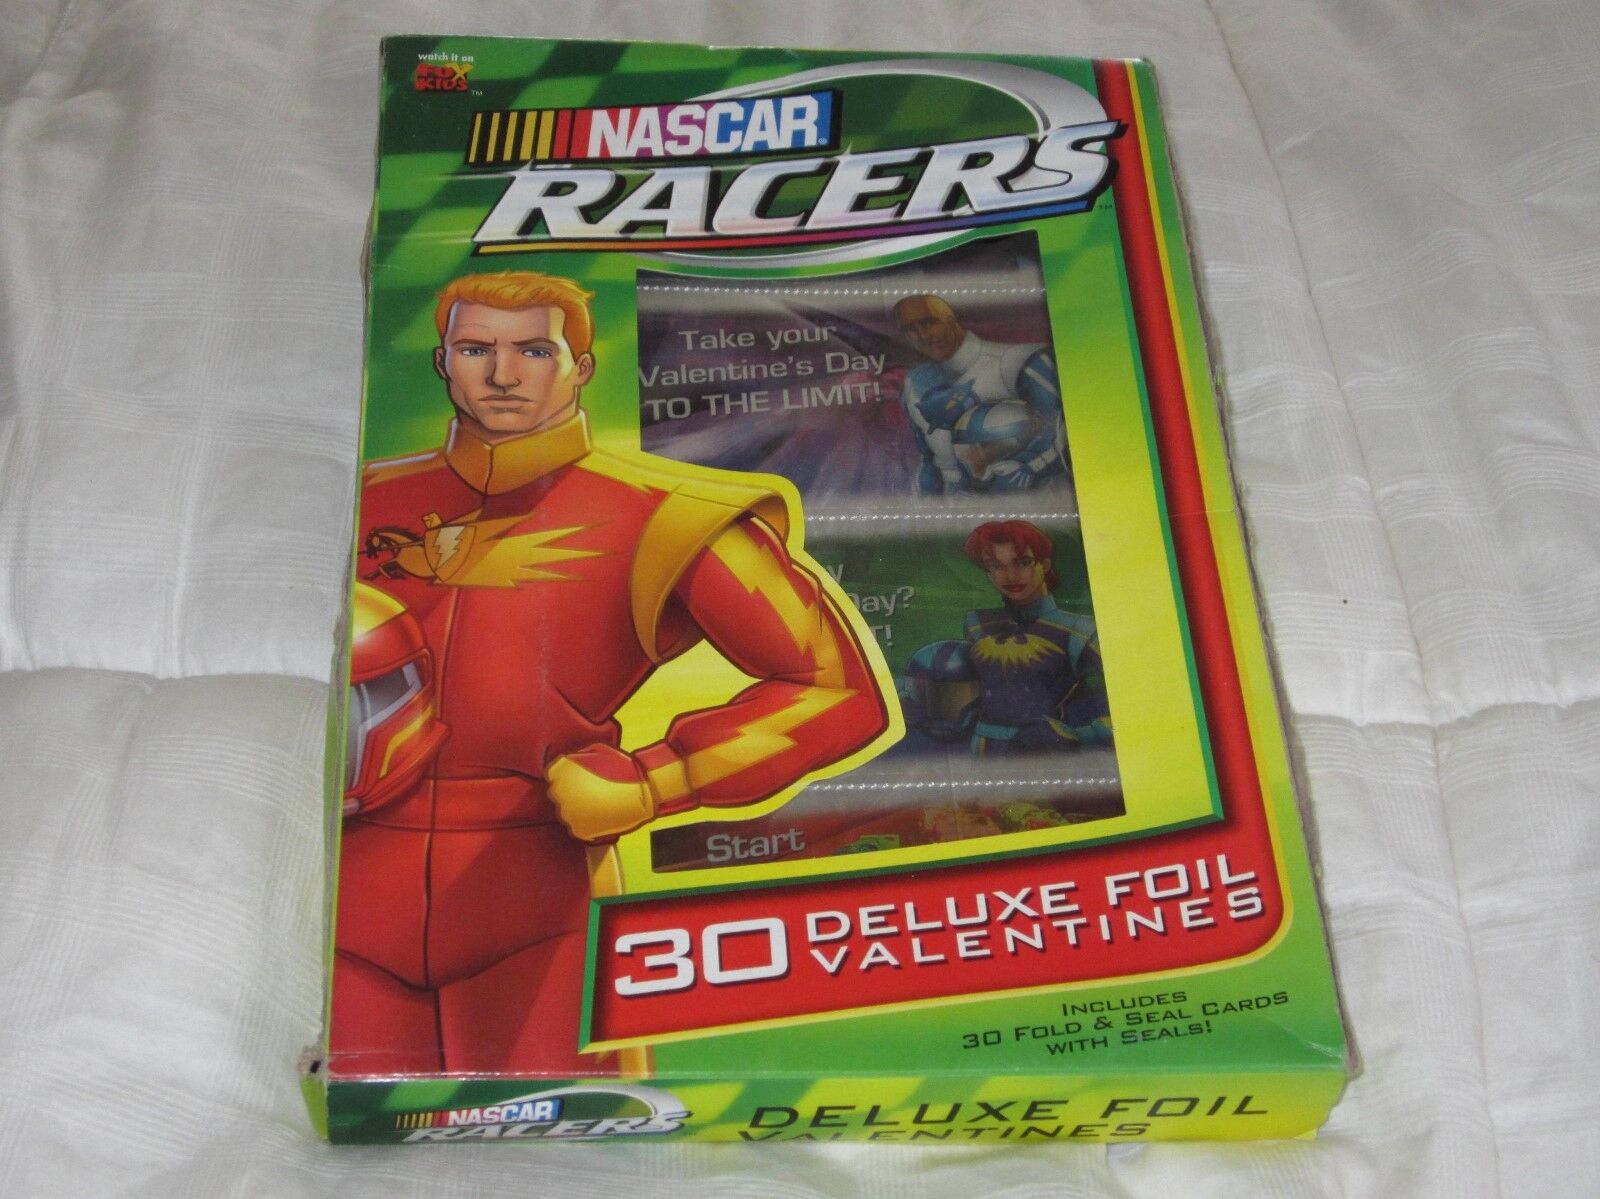 NASCAR Racers Deluxe Foil Valentine\'s 30 Count Fold & Seal Cards - New In Box 